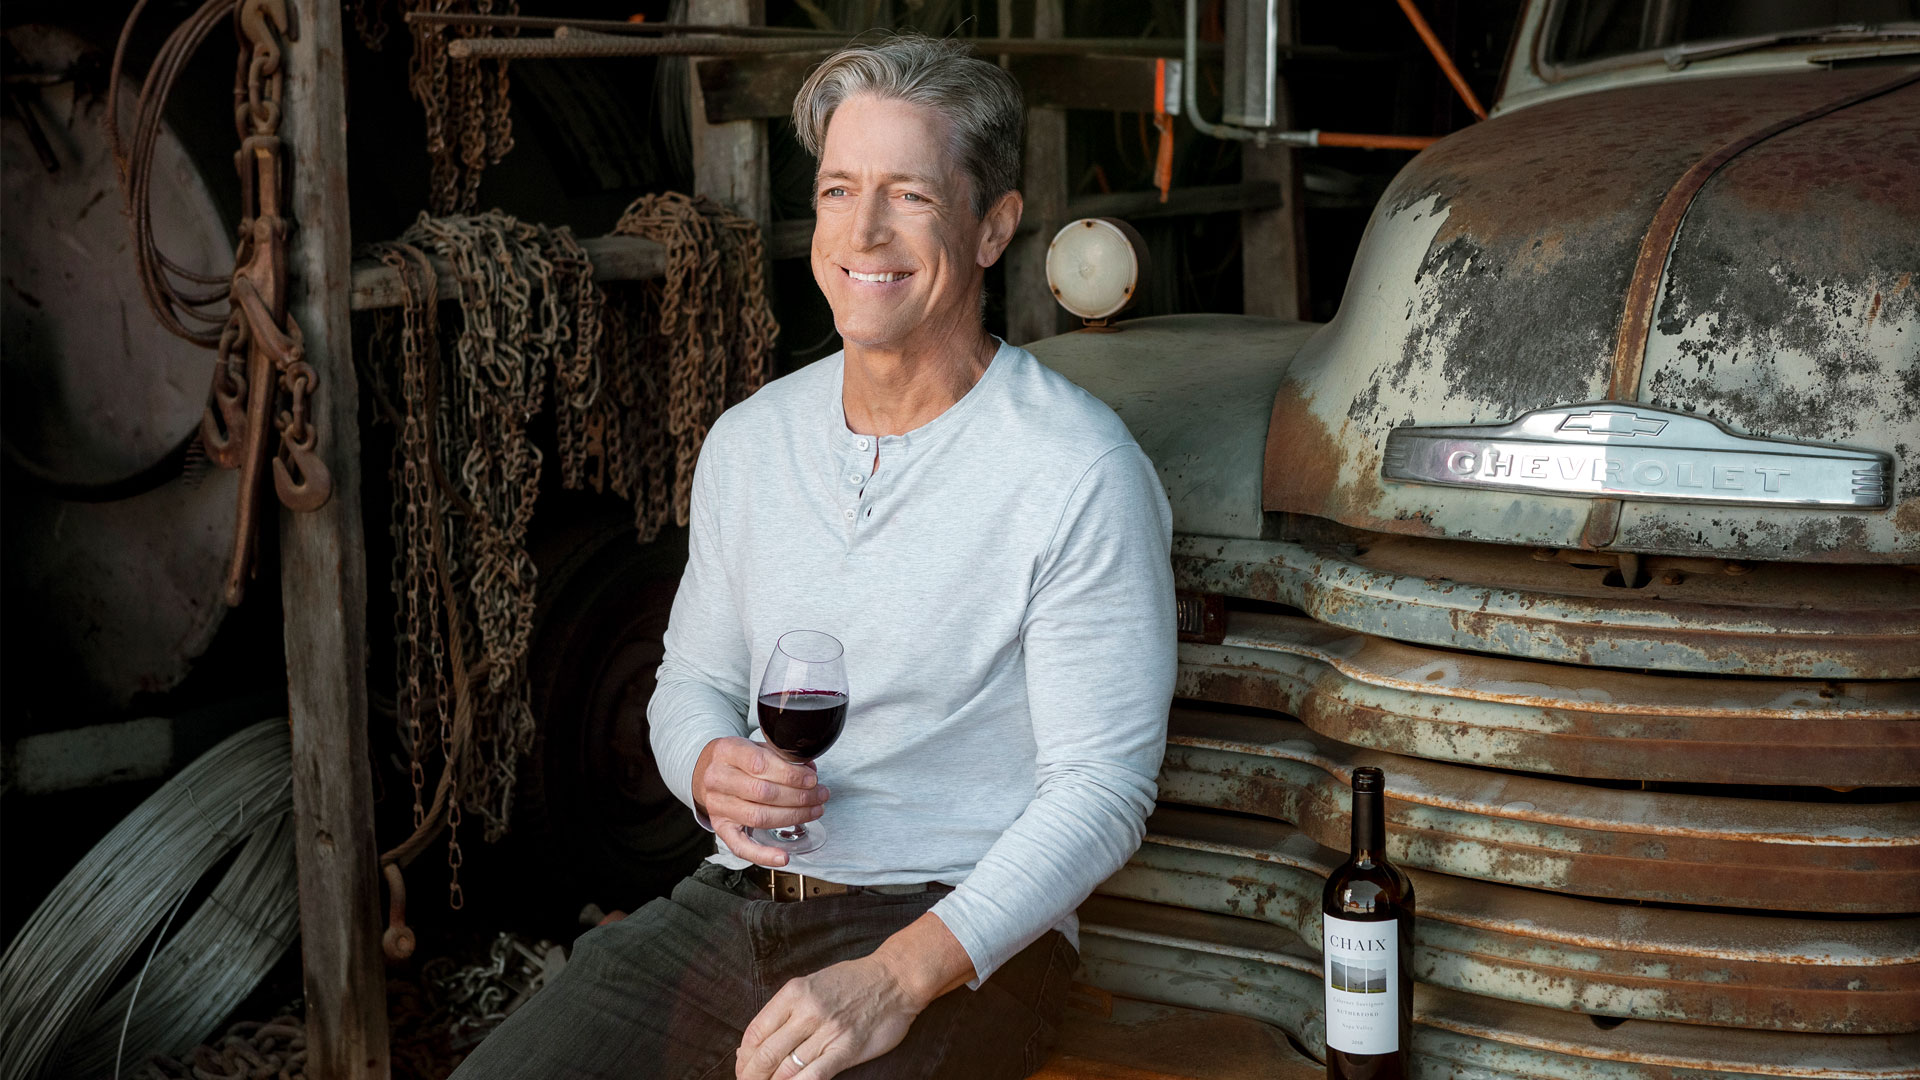 John Chaix Portrait with Cabernet Sauvignon and Old Chevy by Frank Gutierrez